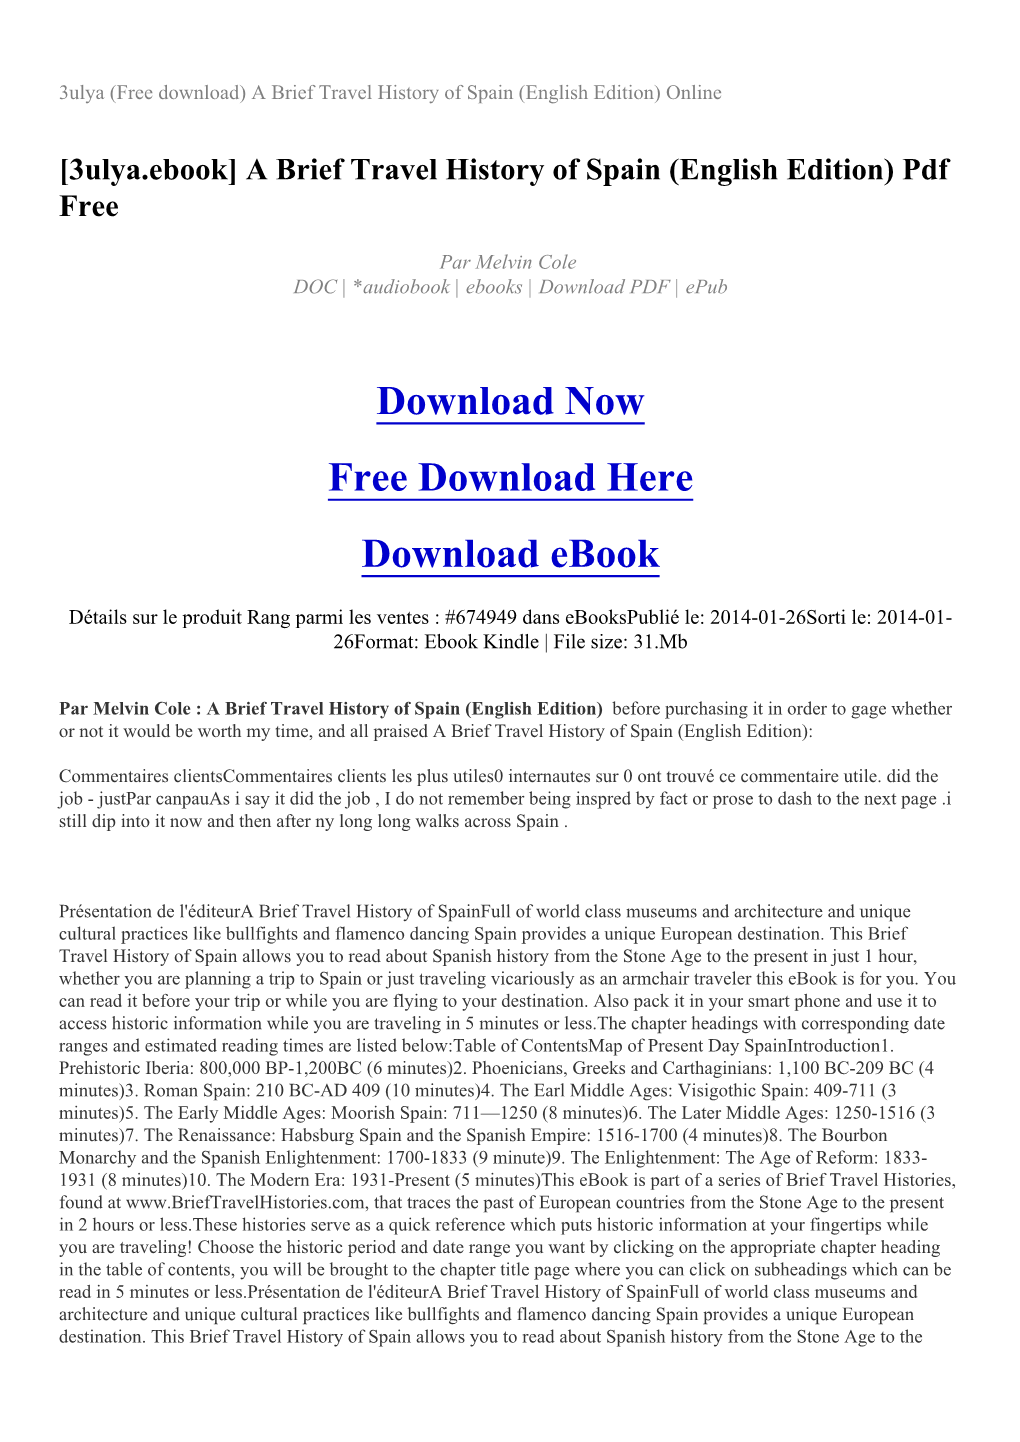 3Ulya (Free Download) a Brief Travel History of Spain (English Edition) Online